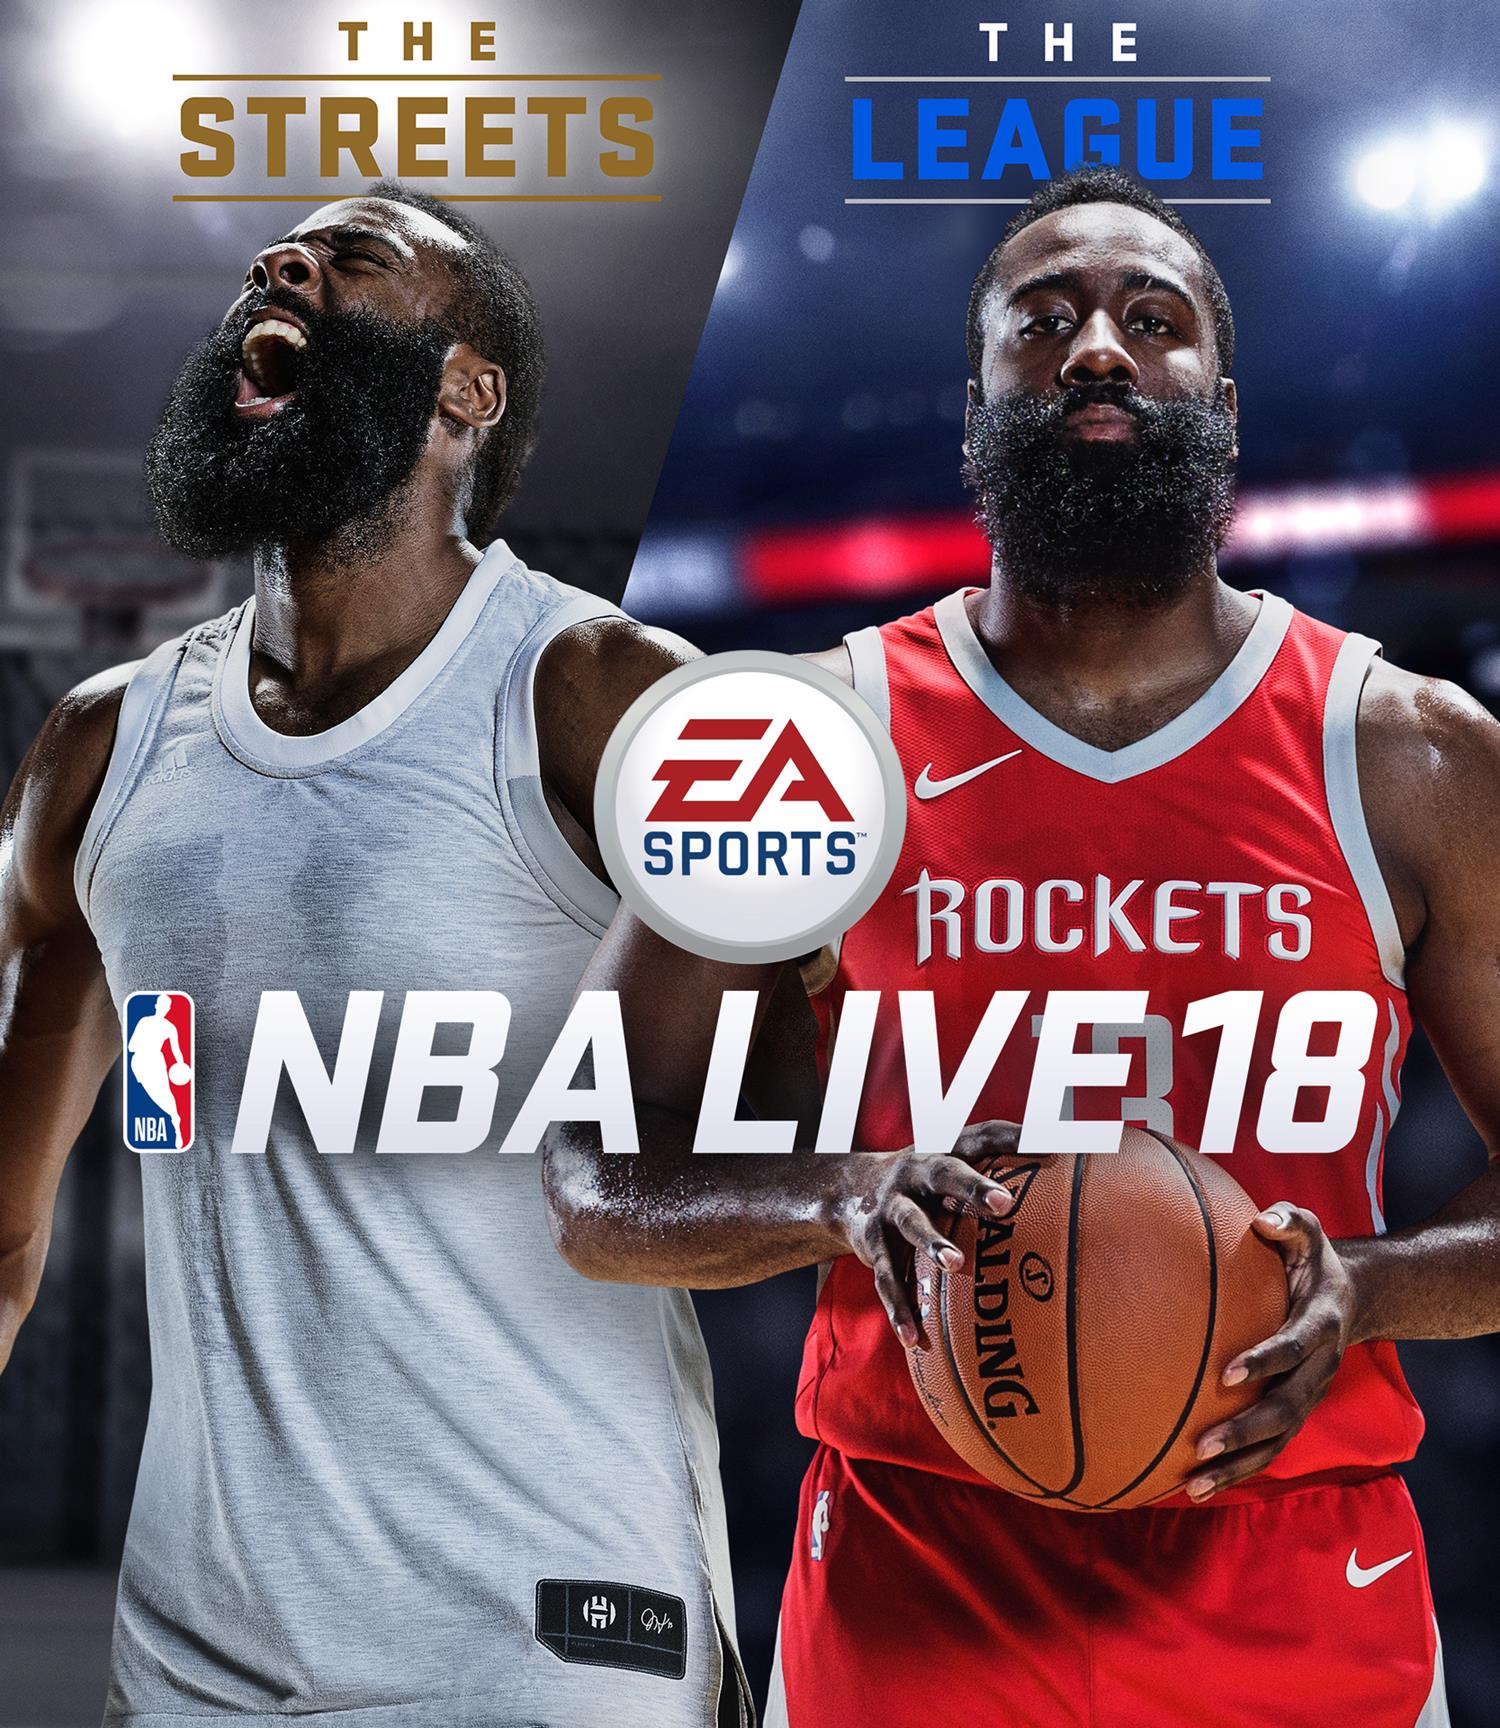 NBA Live 18 demo out today, pre-orders get $20 off VG247